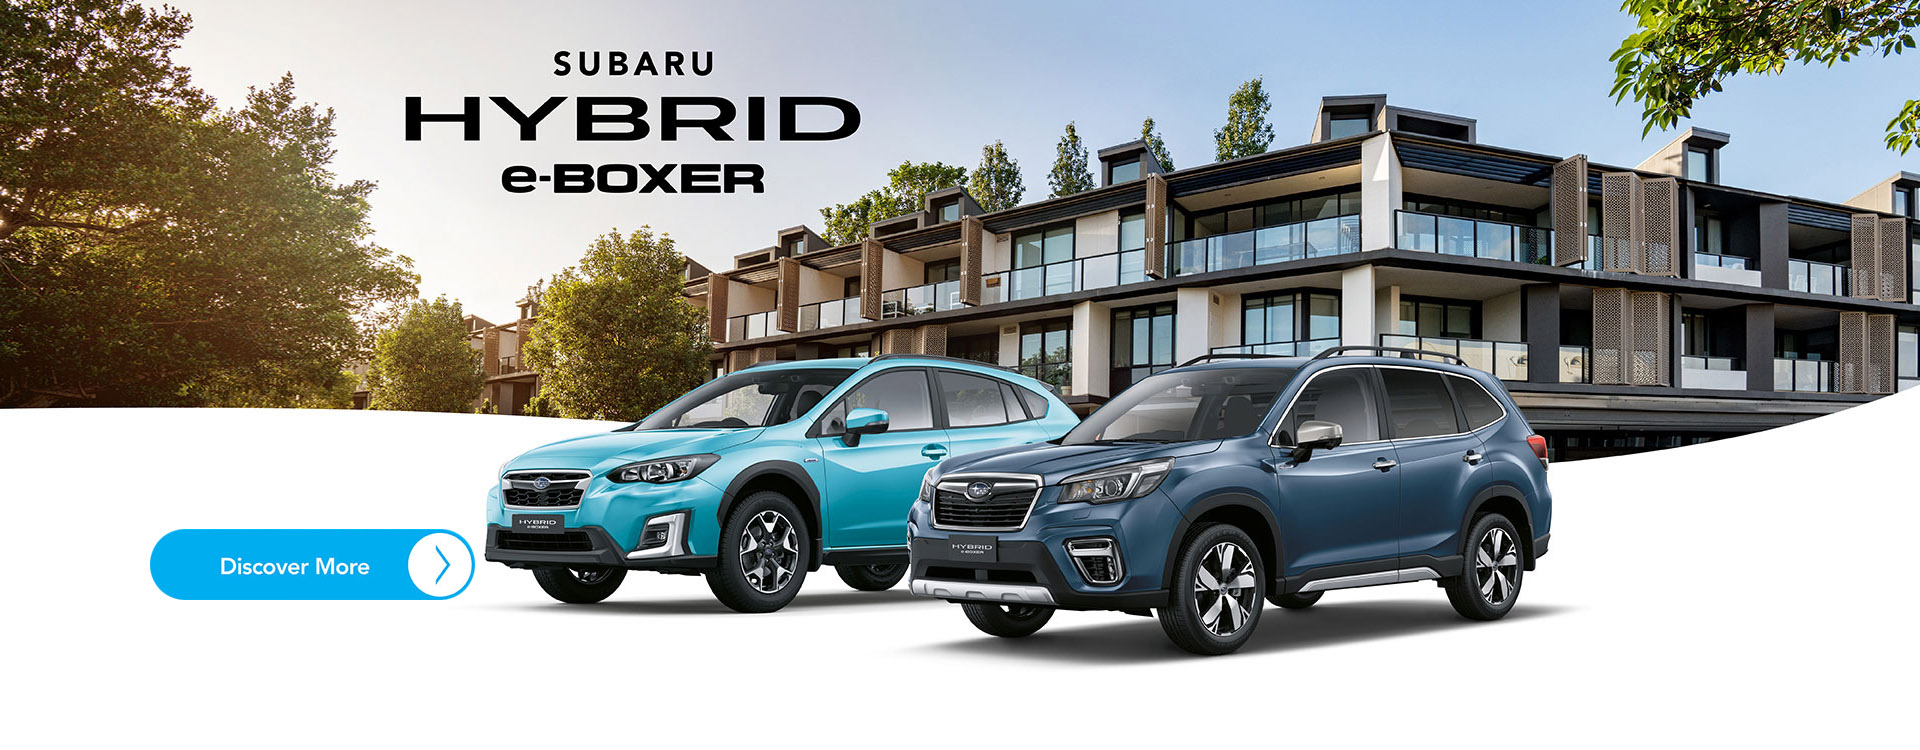 Subaru Hybrid e-Boxer now available in XV and Forester models